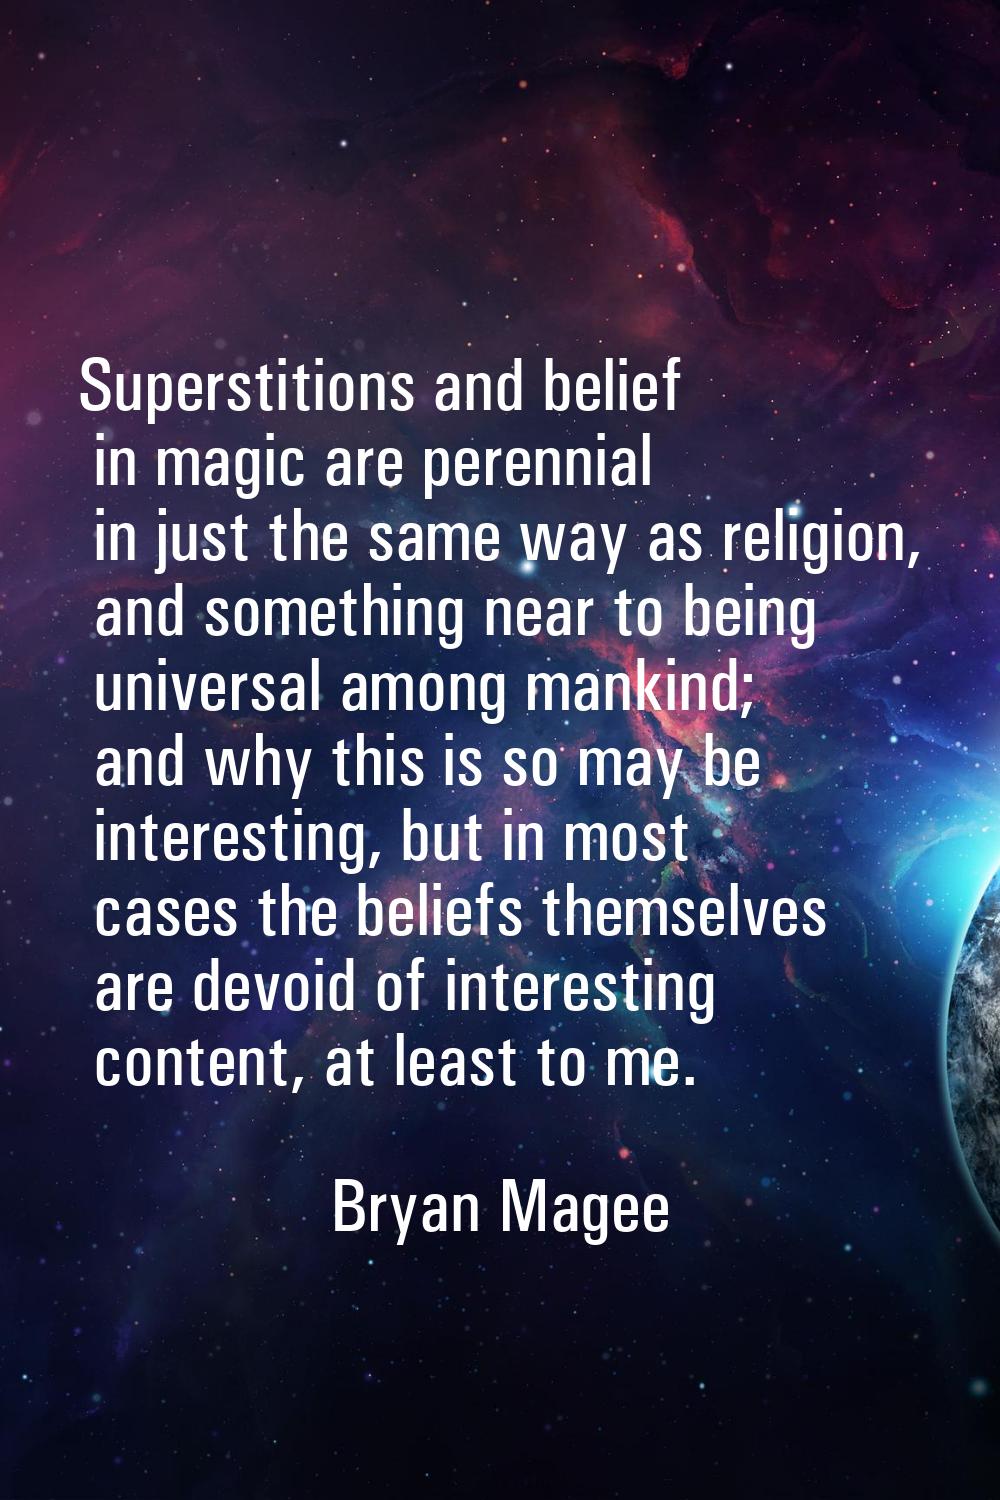 Superstitions and belief in magic are perennial in just the same way as religion, and something nea